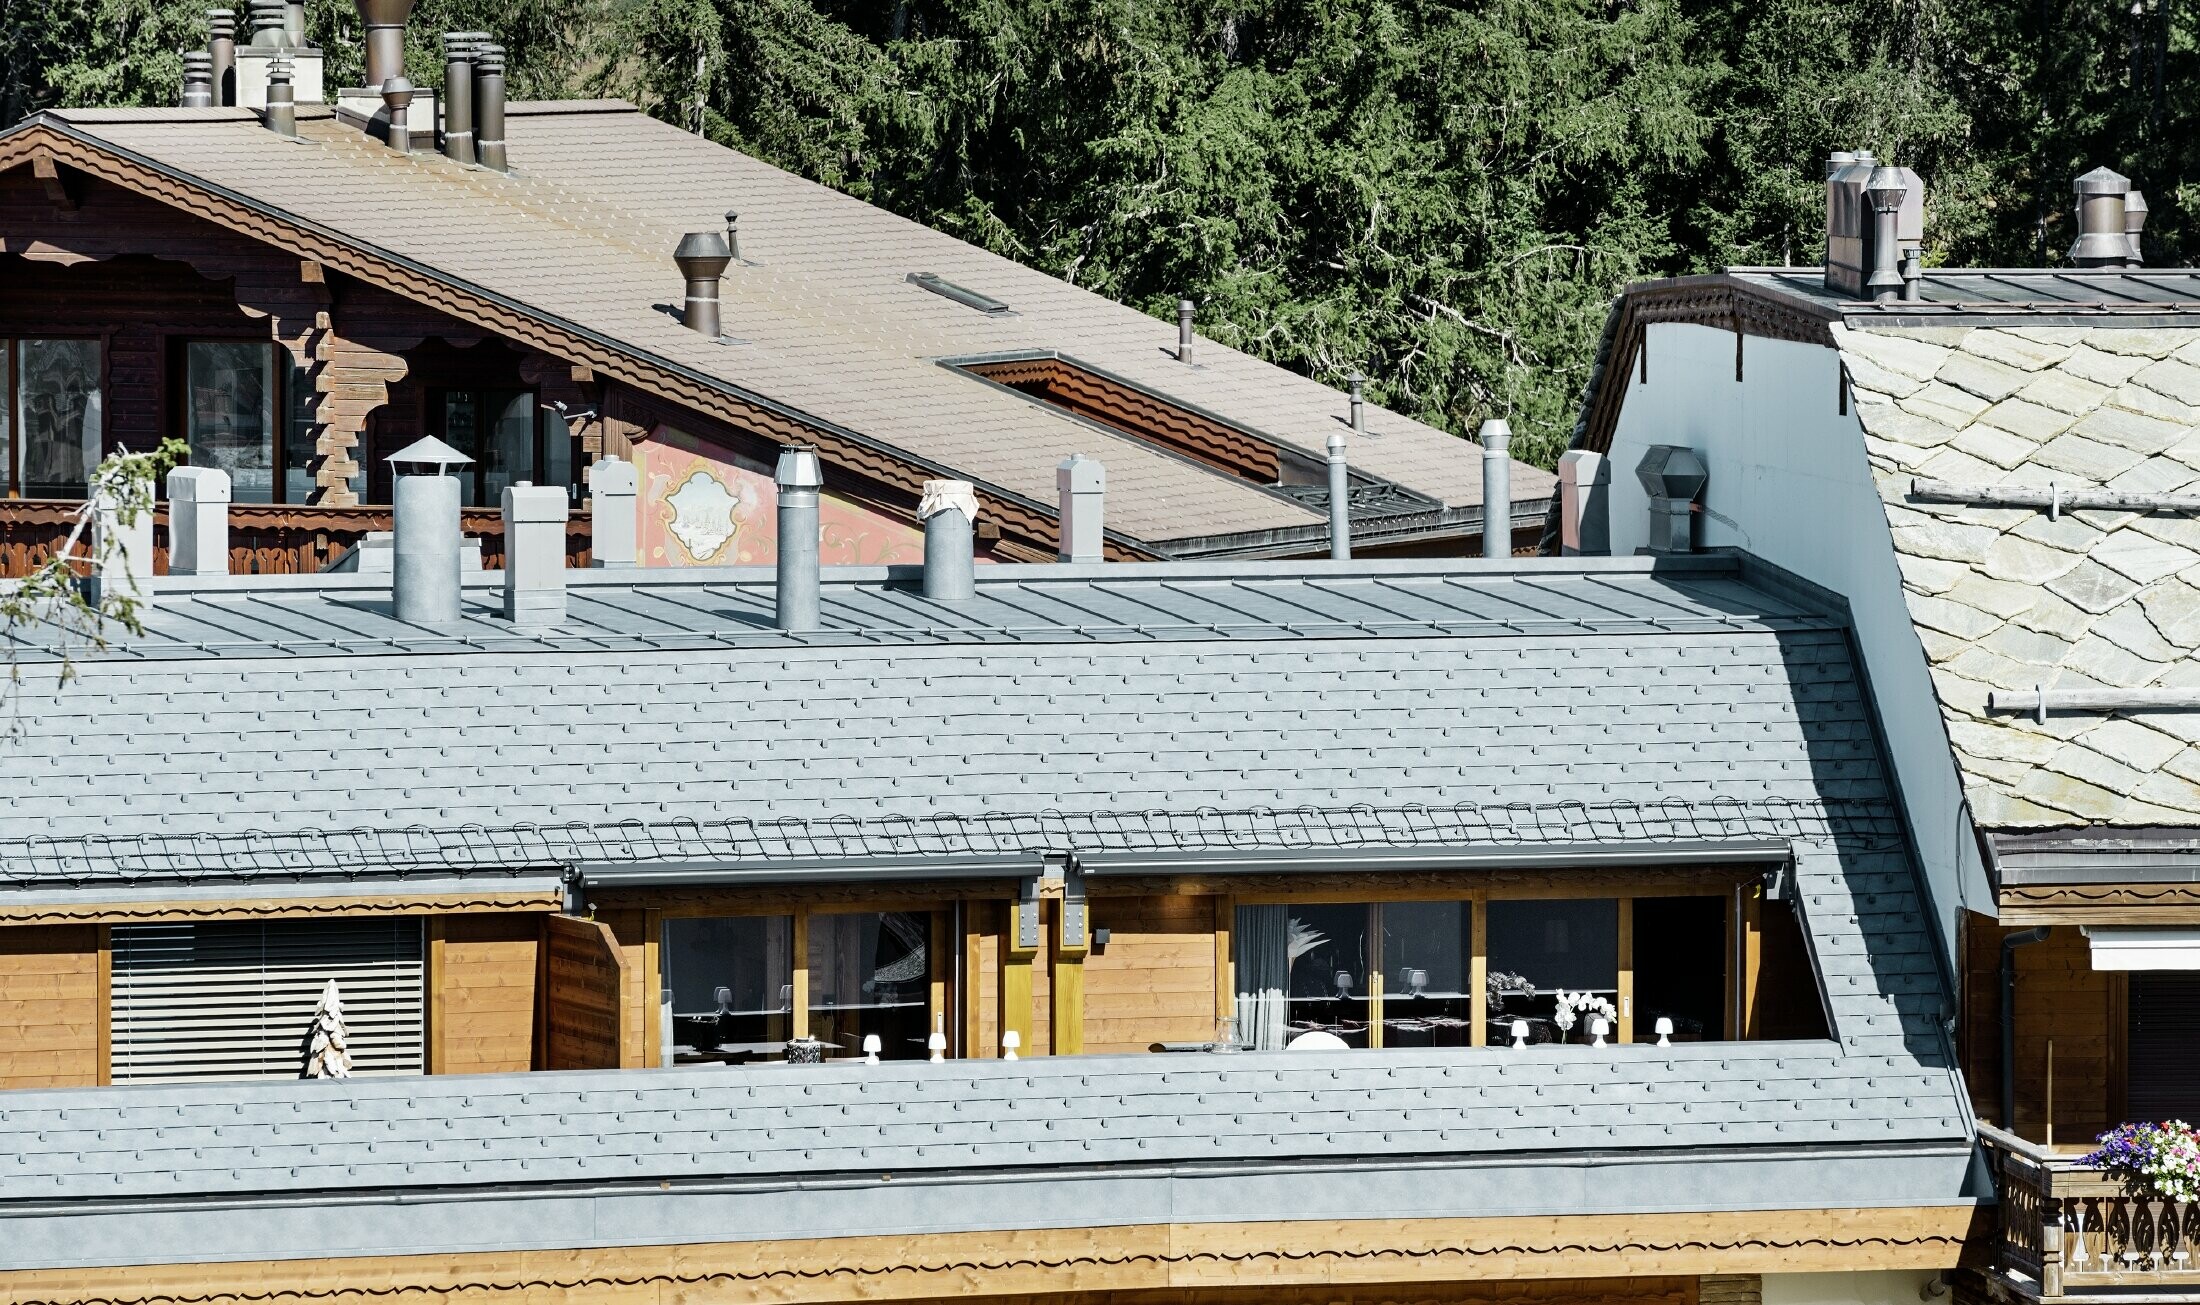 Apartment building in Crans-Montana (Switzerland) with mountains in the background, a façade with lovely wooden elements and a PREFA aluminium shingle roof in stone grey